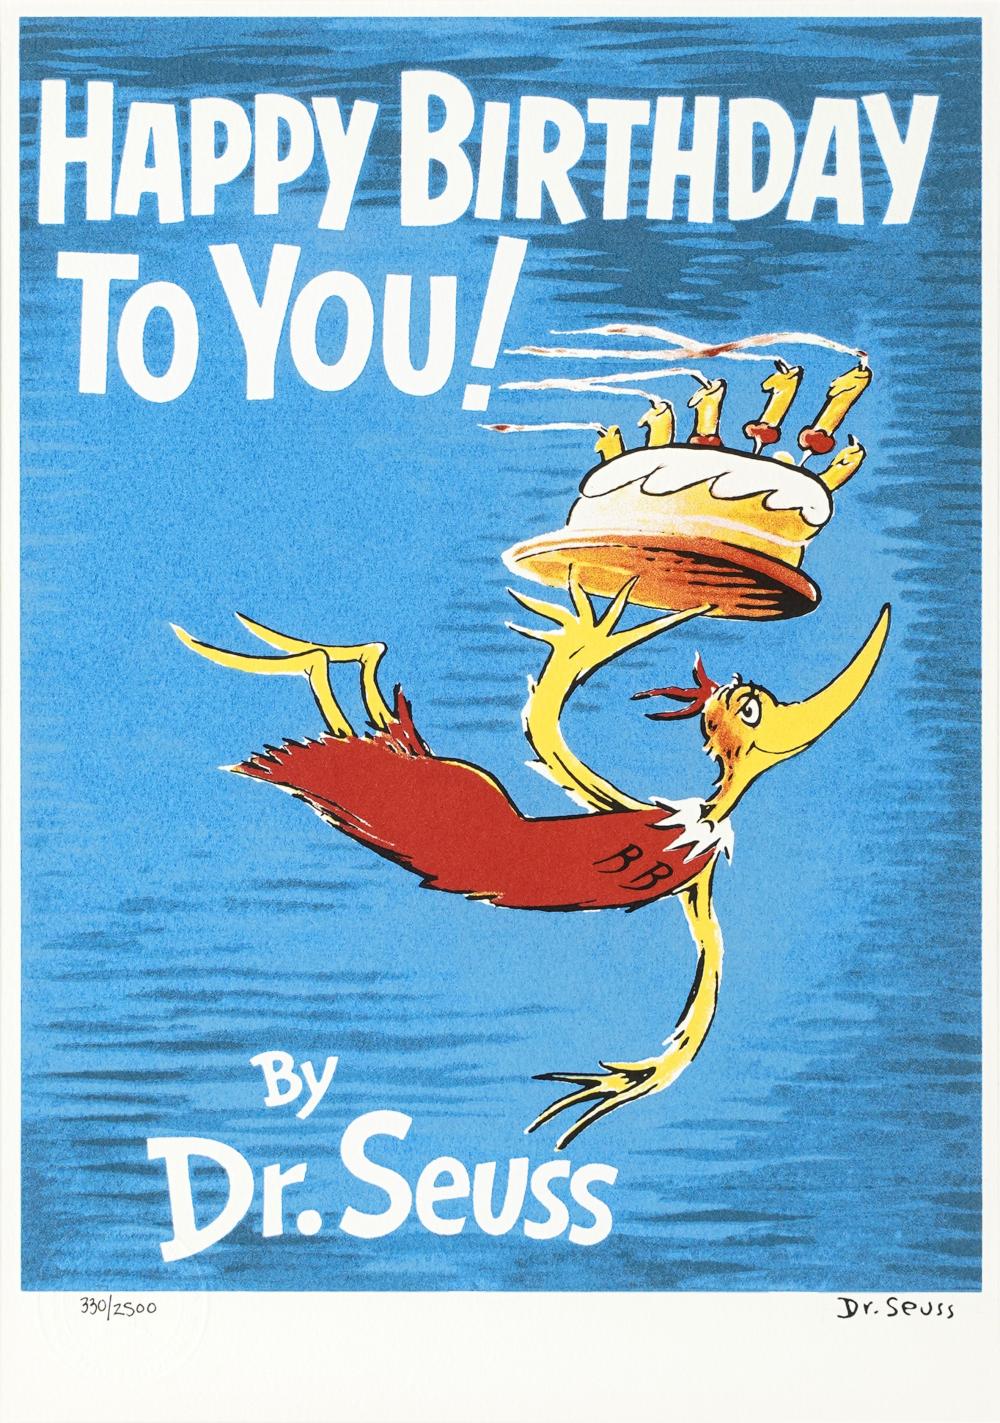 DR. SEUSS (THEODORE S GIESEL): HAPPY